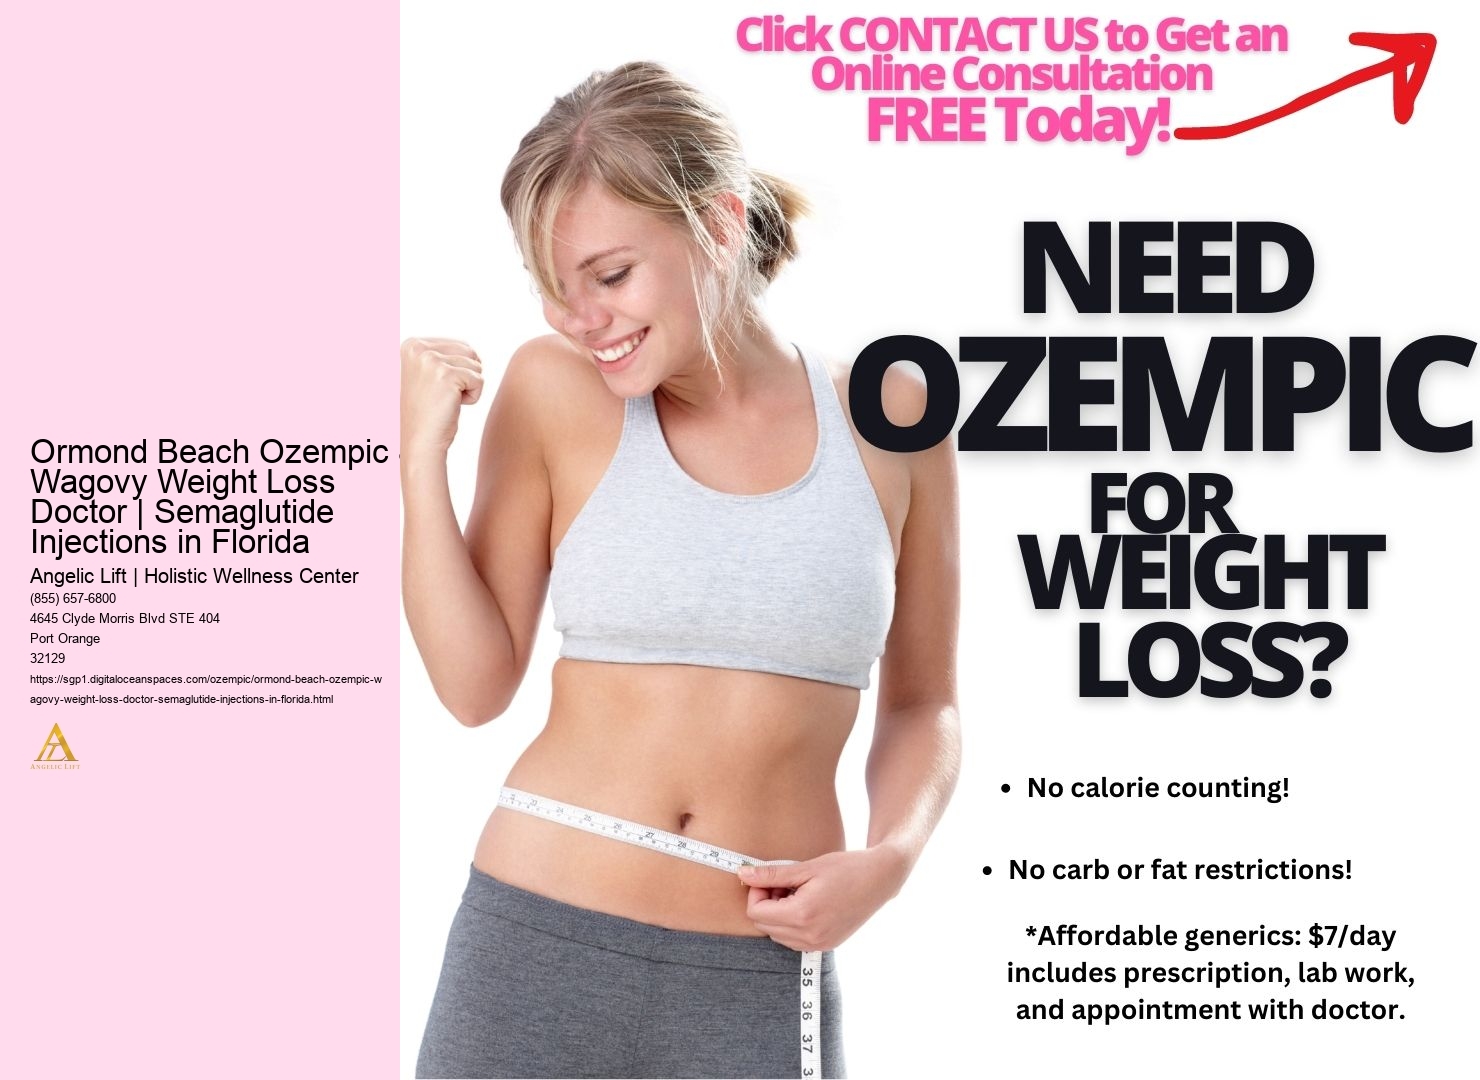 Ormond Beach Ozempic & Wagovy Weight Loss Doctor | Semaglutide Injections in Florida